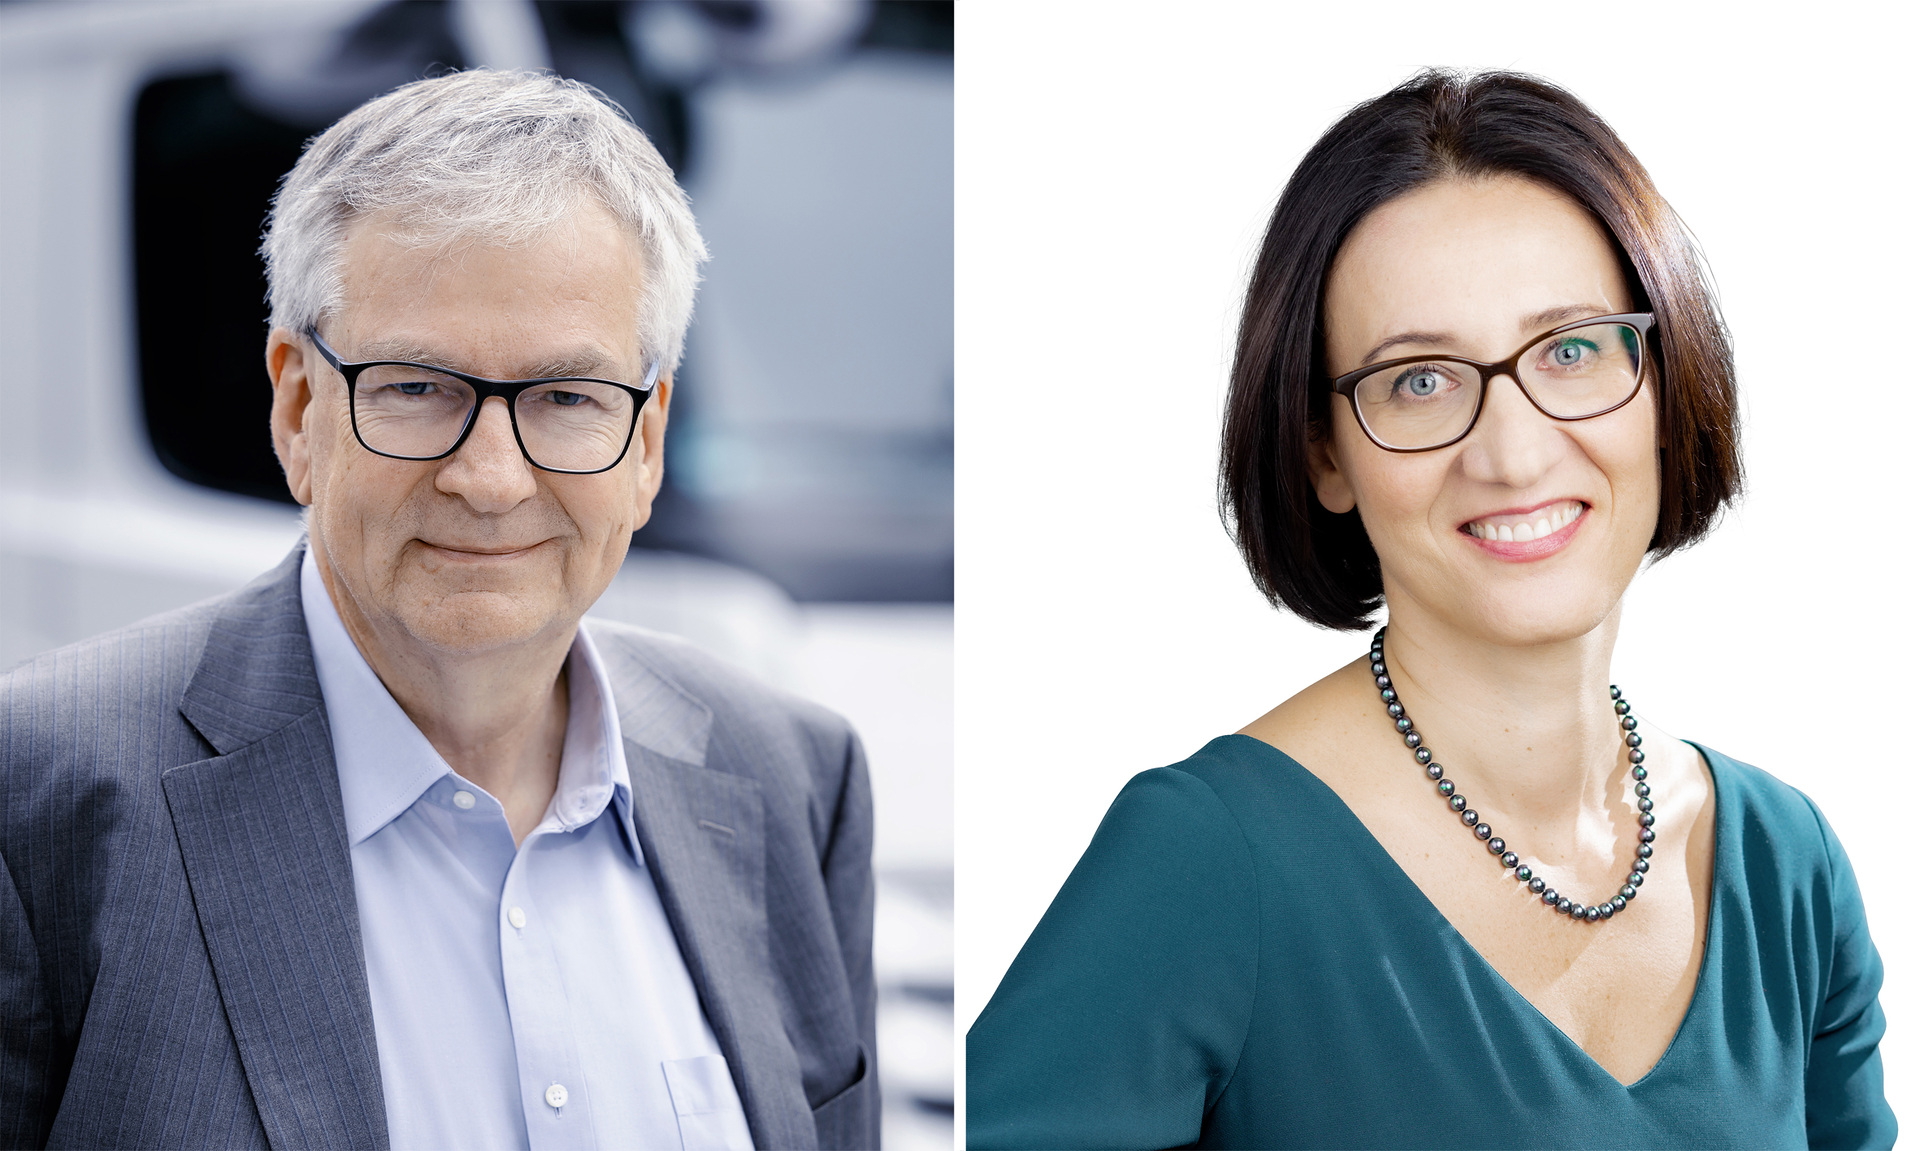 “Zero emissions: The infrastructure challenge”, Anna Mascolo and Martin Daum on the podcast